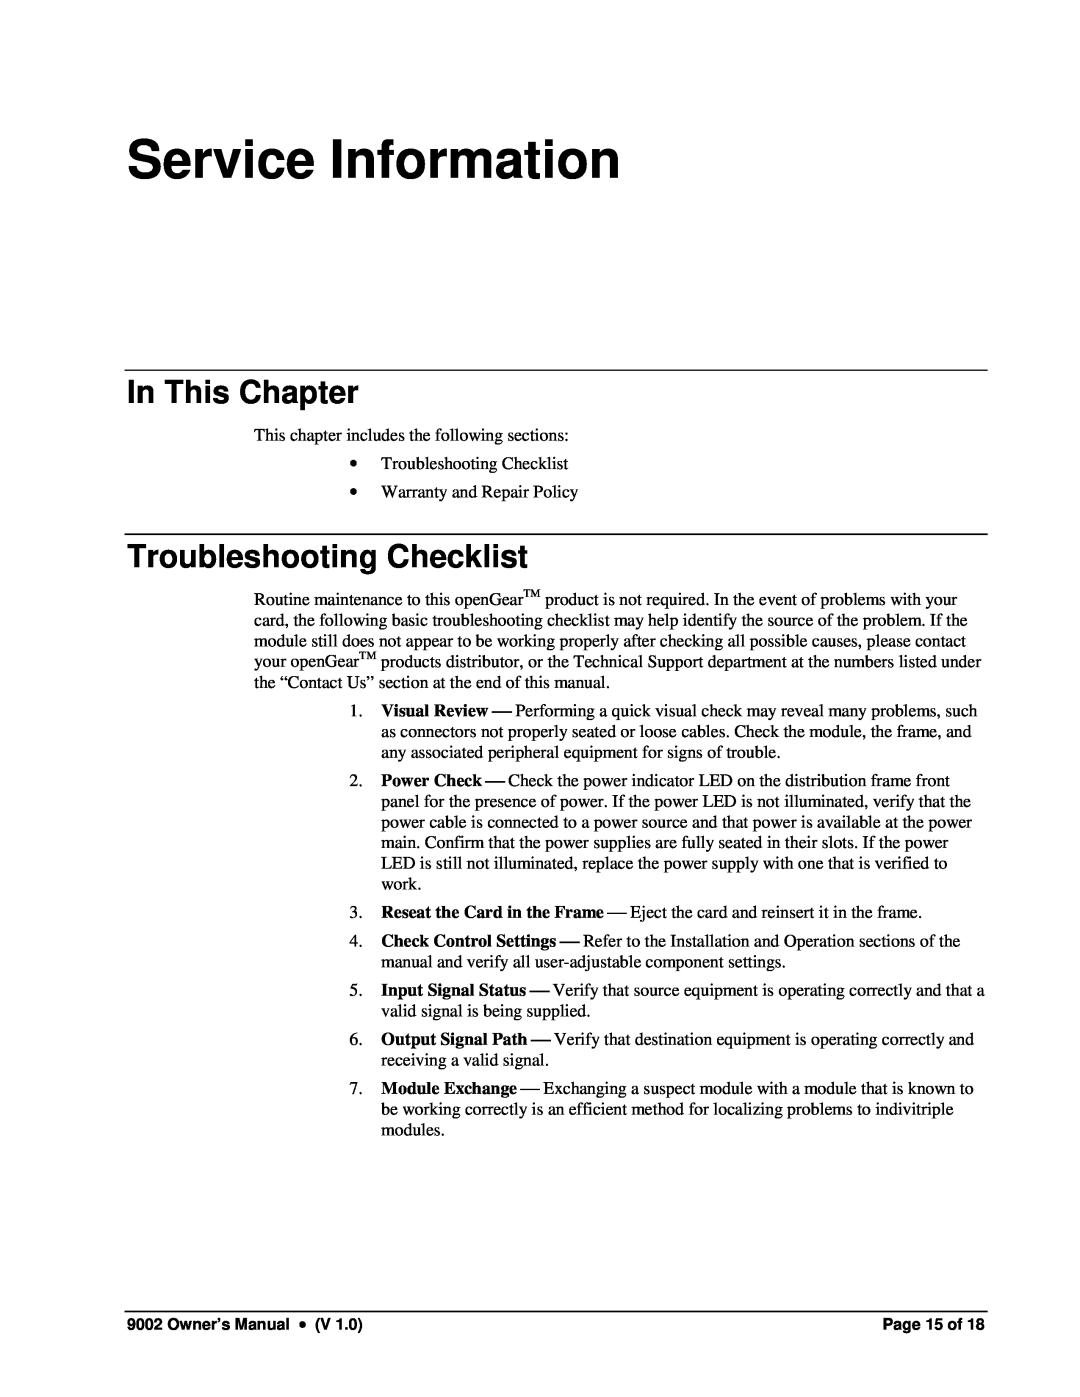 Cobalt Networks 9002 owner manual Service Information, Troubleshooting Checklist, In This Chapter 